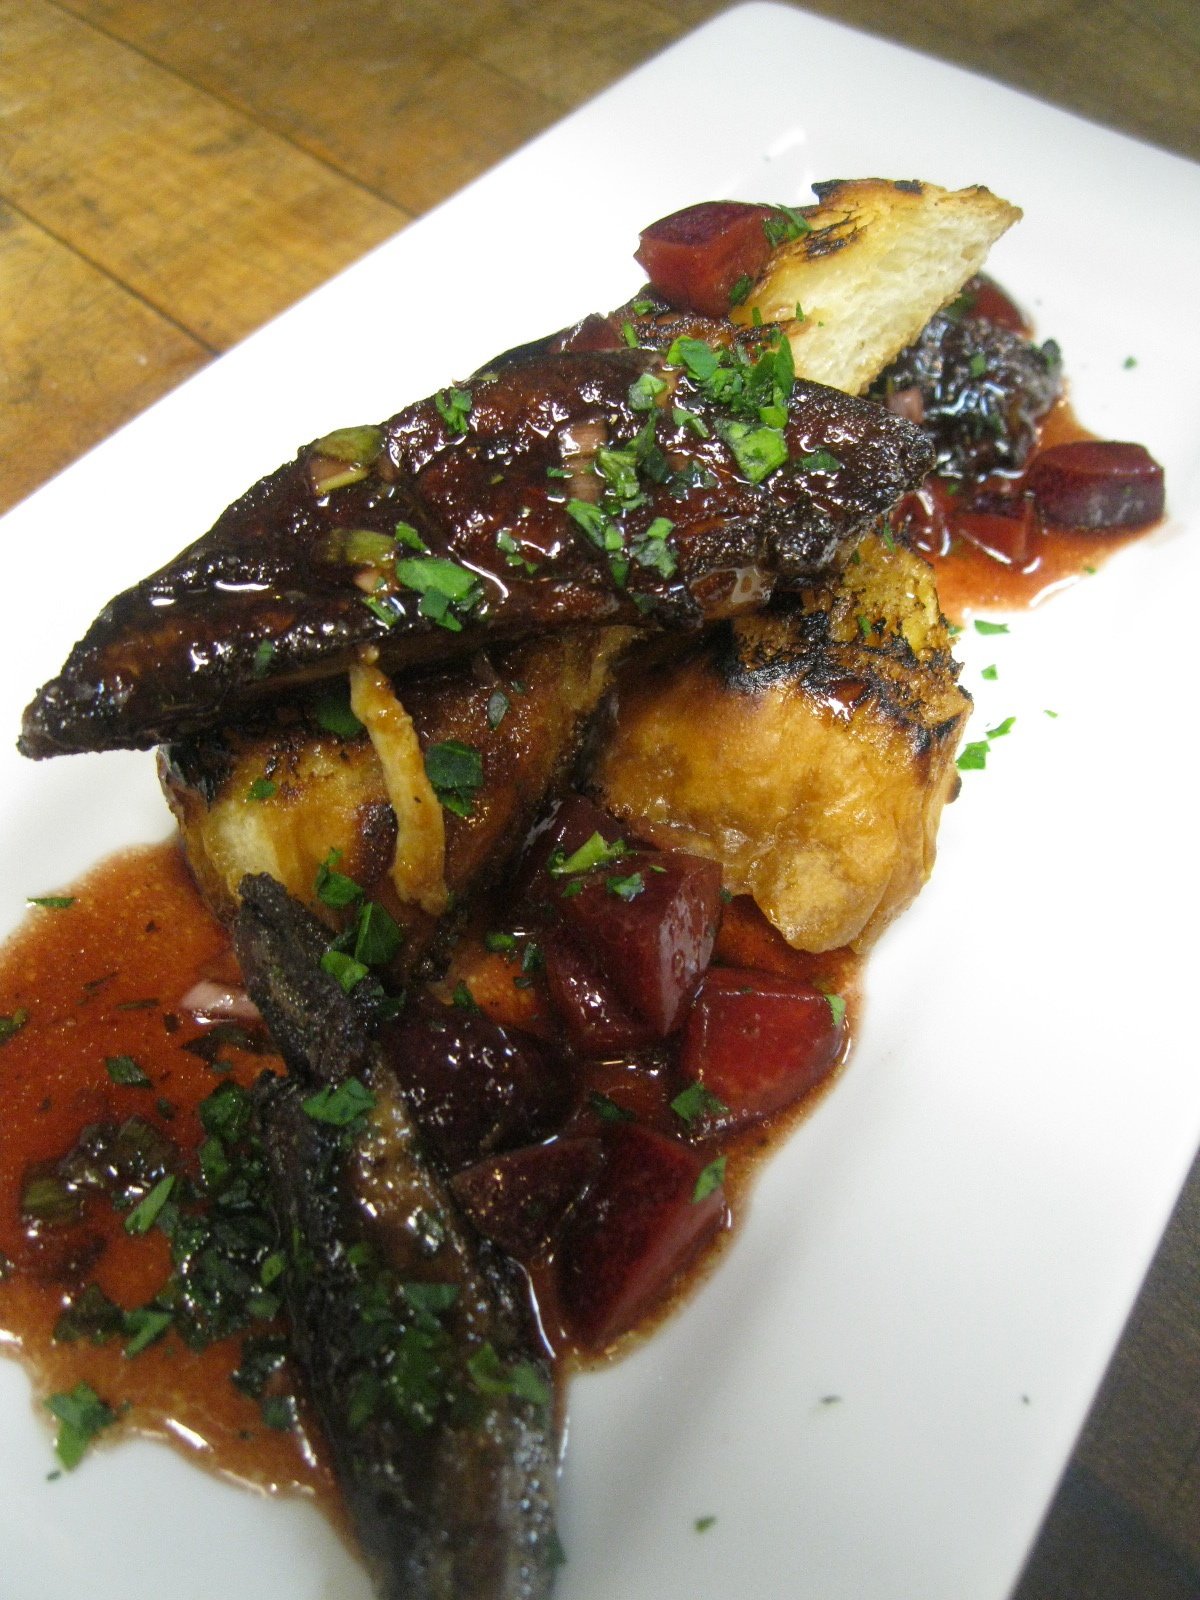 Pan seared Foie Gras with caramelized pears and a balsamic zinfandel reduction